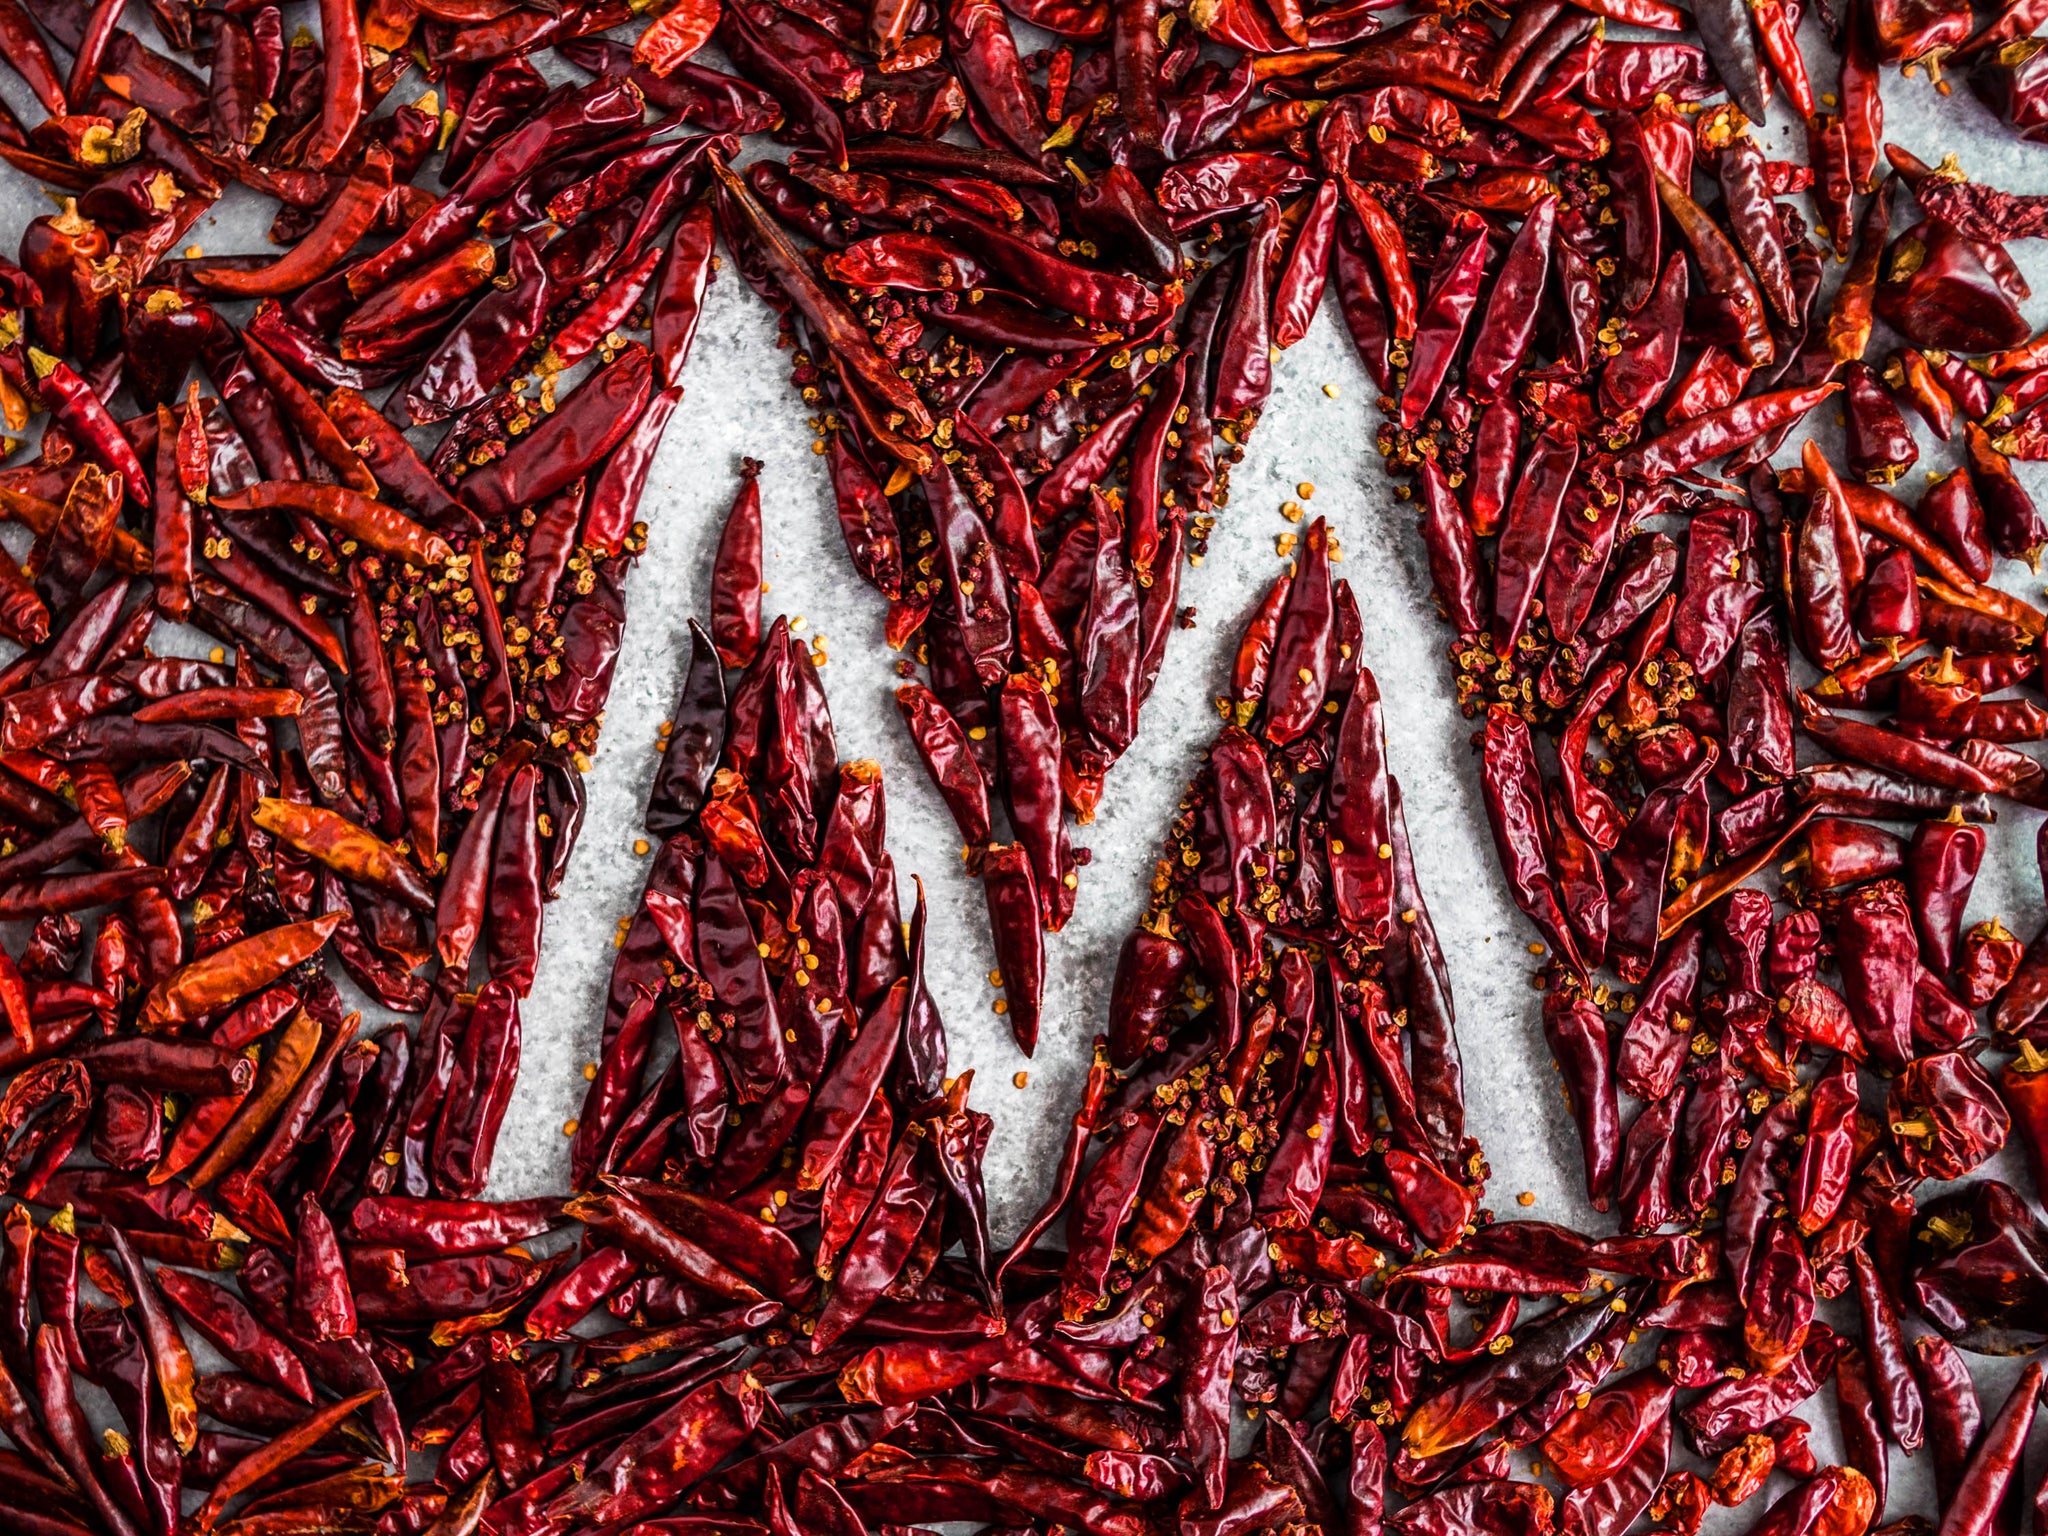 Welcome to The Mala Market: A Guide to Our Products and Recipes